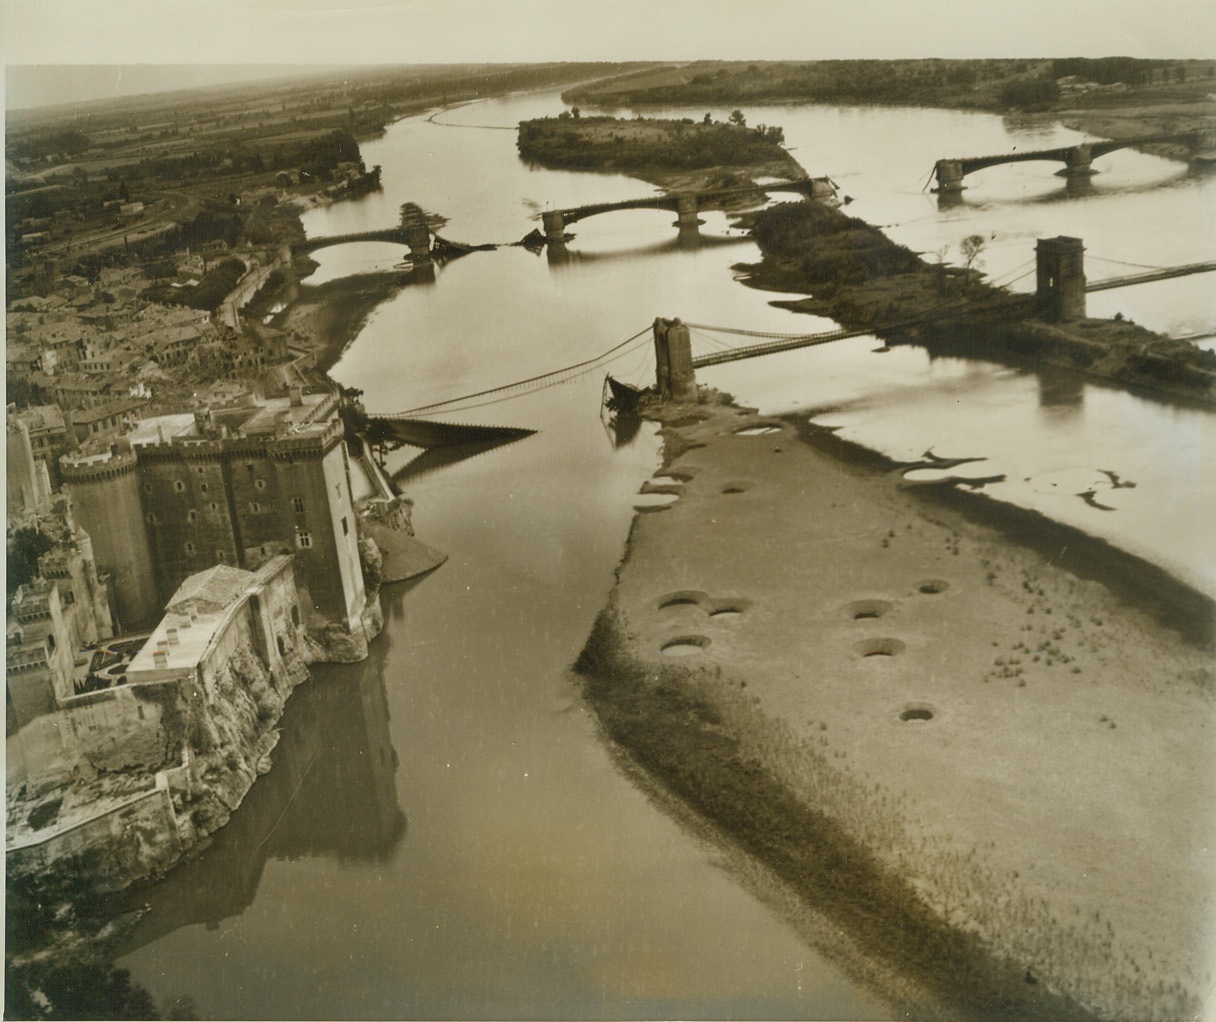 To Help Free France, 9/9/1944. FRANCE -- Desolation marks the once beautiful Rhone River at Tarascon in Southern France. Wrecked bridges, effectively bombed by the Allies to hinder the German retreat, are a grim reminder of the destruction that accompanies war. Pock marks in the islets between bridges show where Allied bombs missed their target. At left is a castle-like building one of many that dot the countryside in Southern France. Photo by Charles Seawood, ACME Photographer for the War Picture Pool. Credit - WP- (ACME);